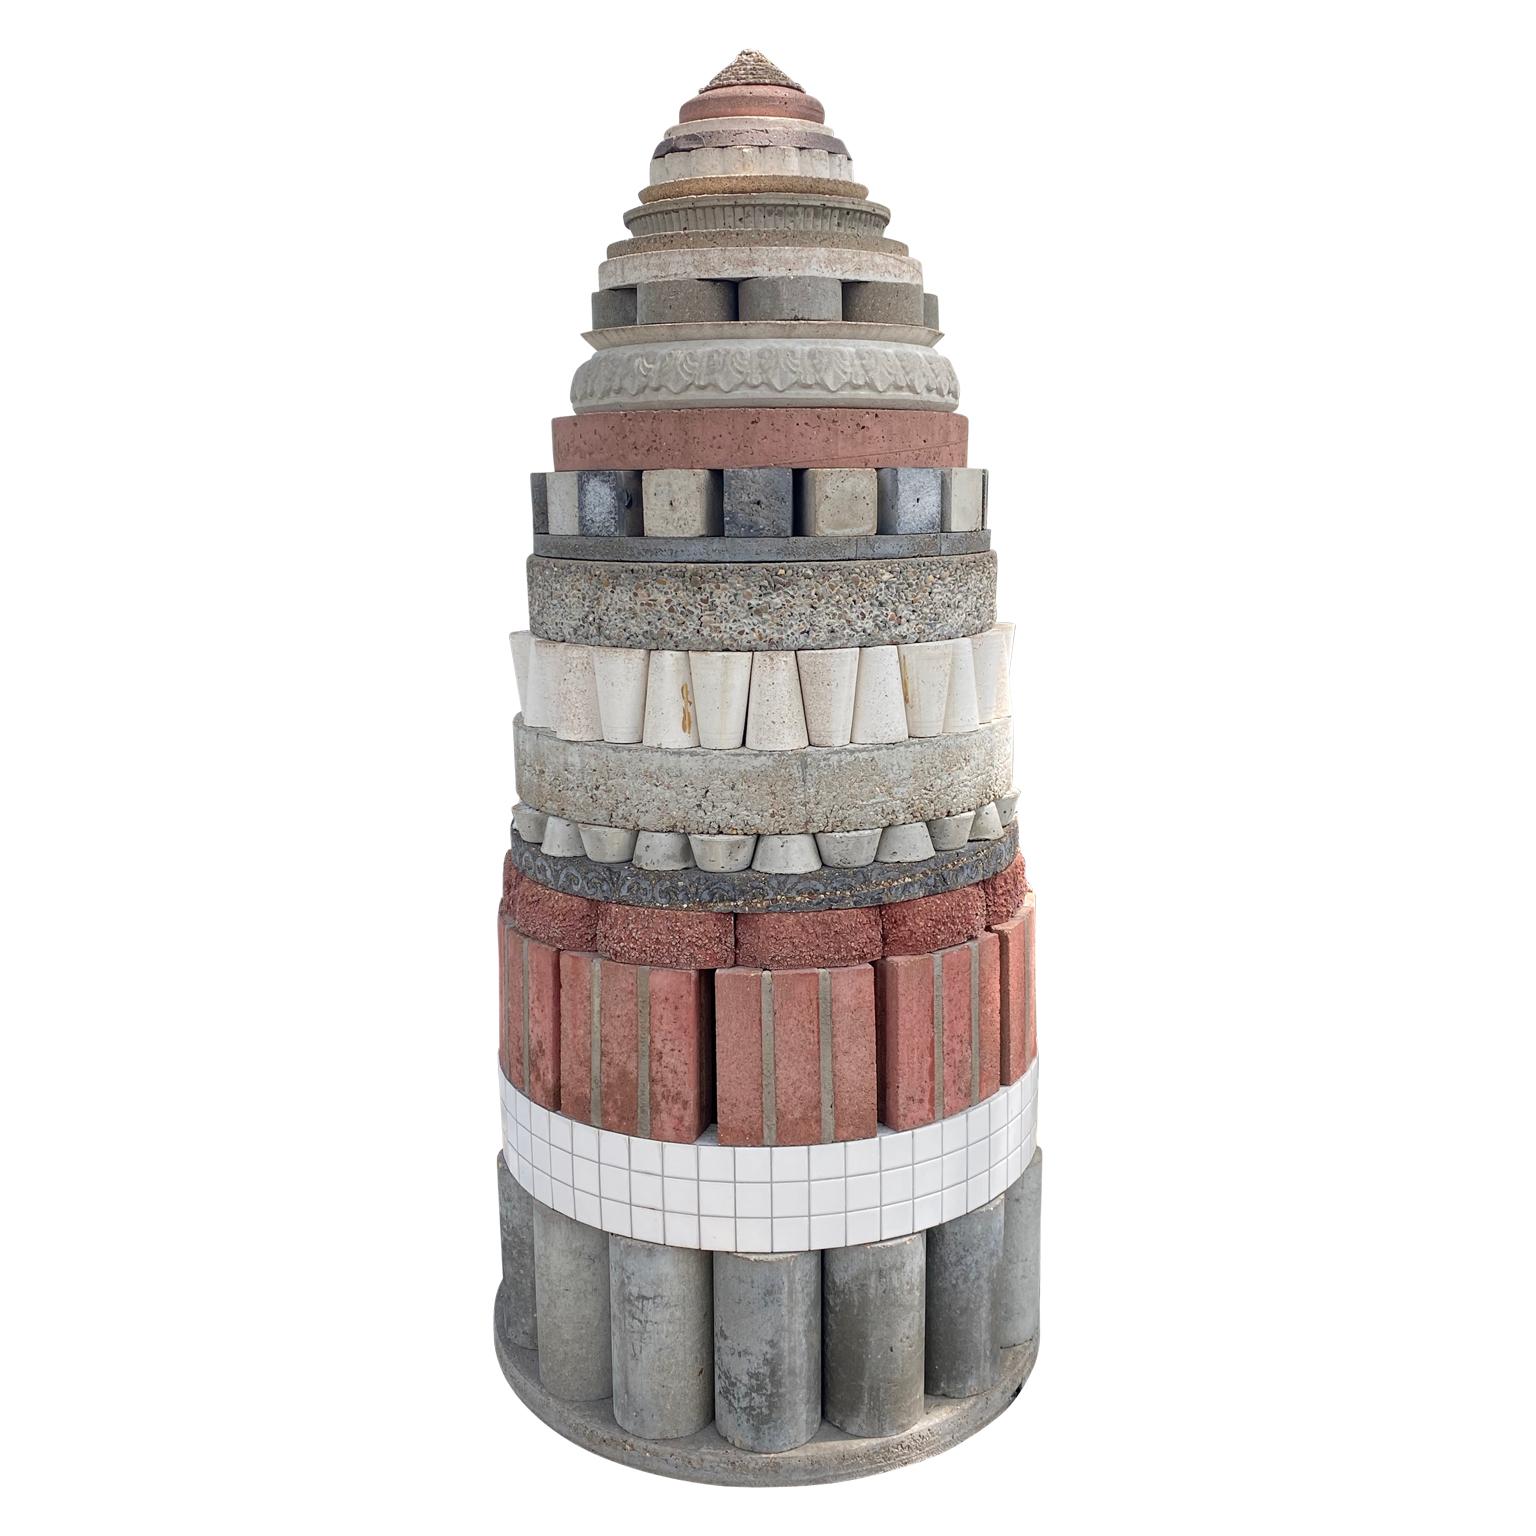 Modern abstract outdoor totem sculpture by Houston artist Joe Mancuso. The piece is constructed out of various decorative brick, stone, and concrete pieces all stacked into a tapered tower. The work is able to be displayed both indoors or outdoors.